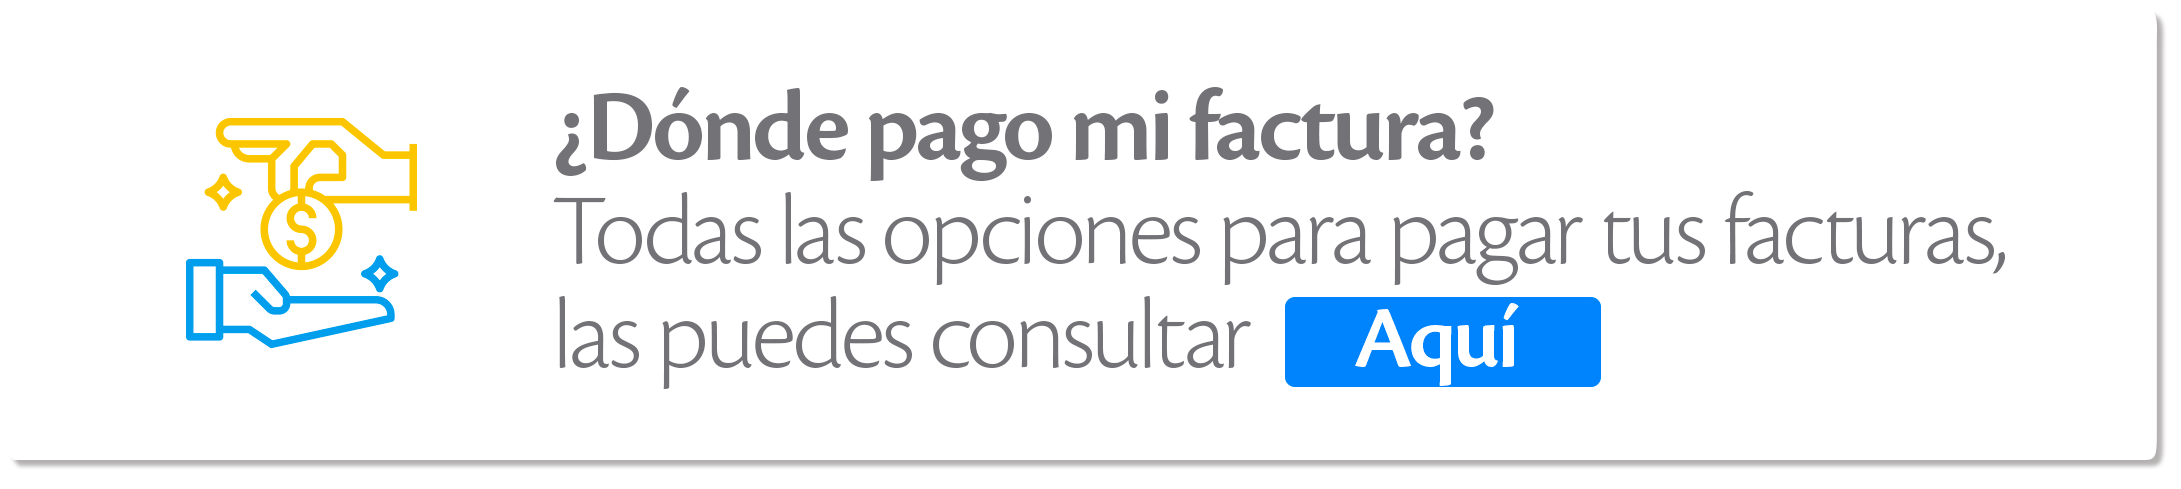 aw-donde_pago_mi_factura_ftth.png